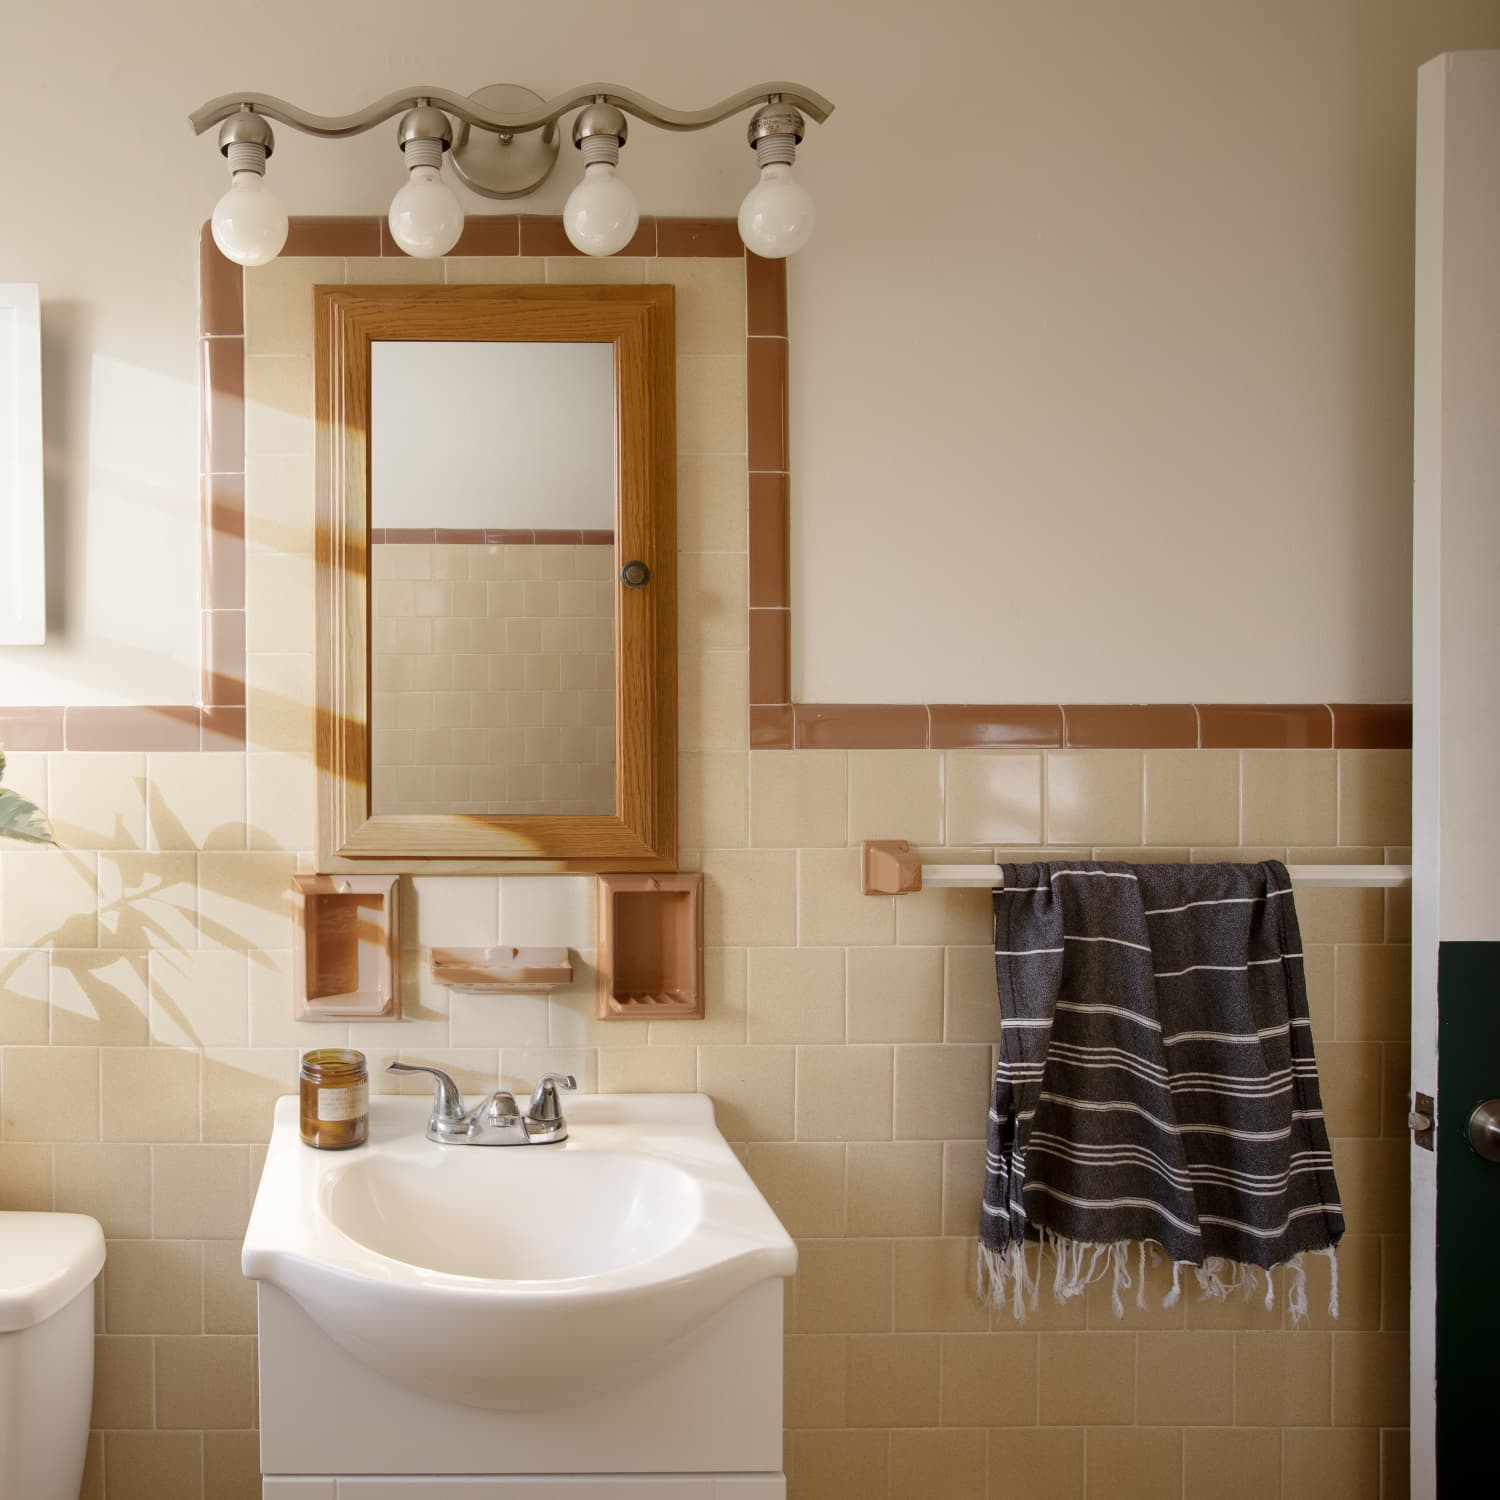 7 Things in the Bathroom You Should Get Rid of Before an Open House